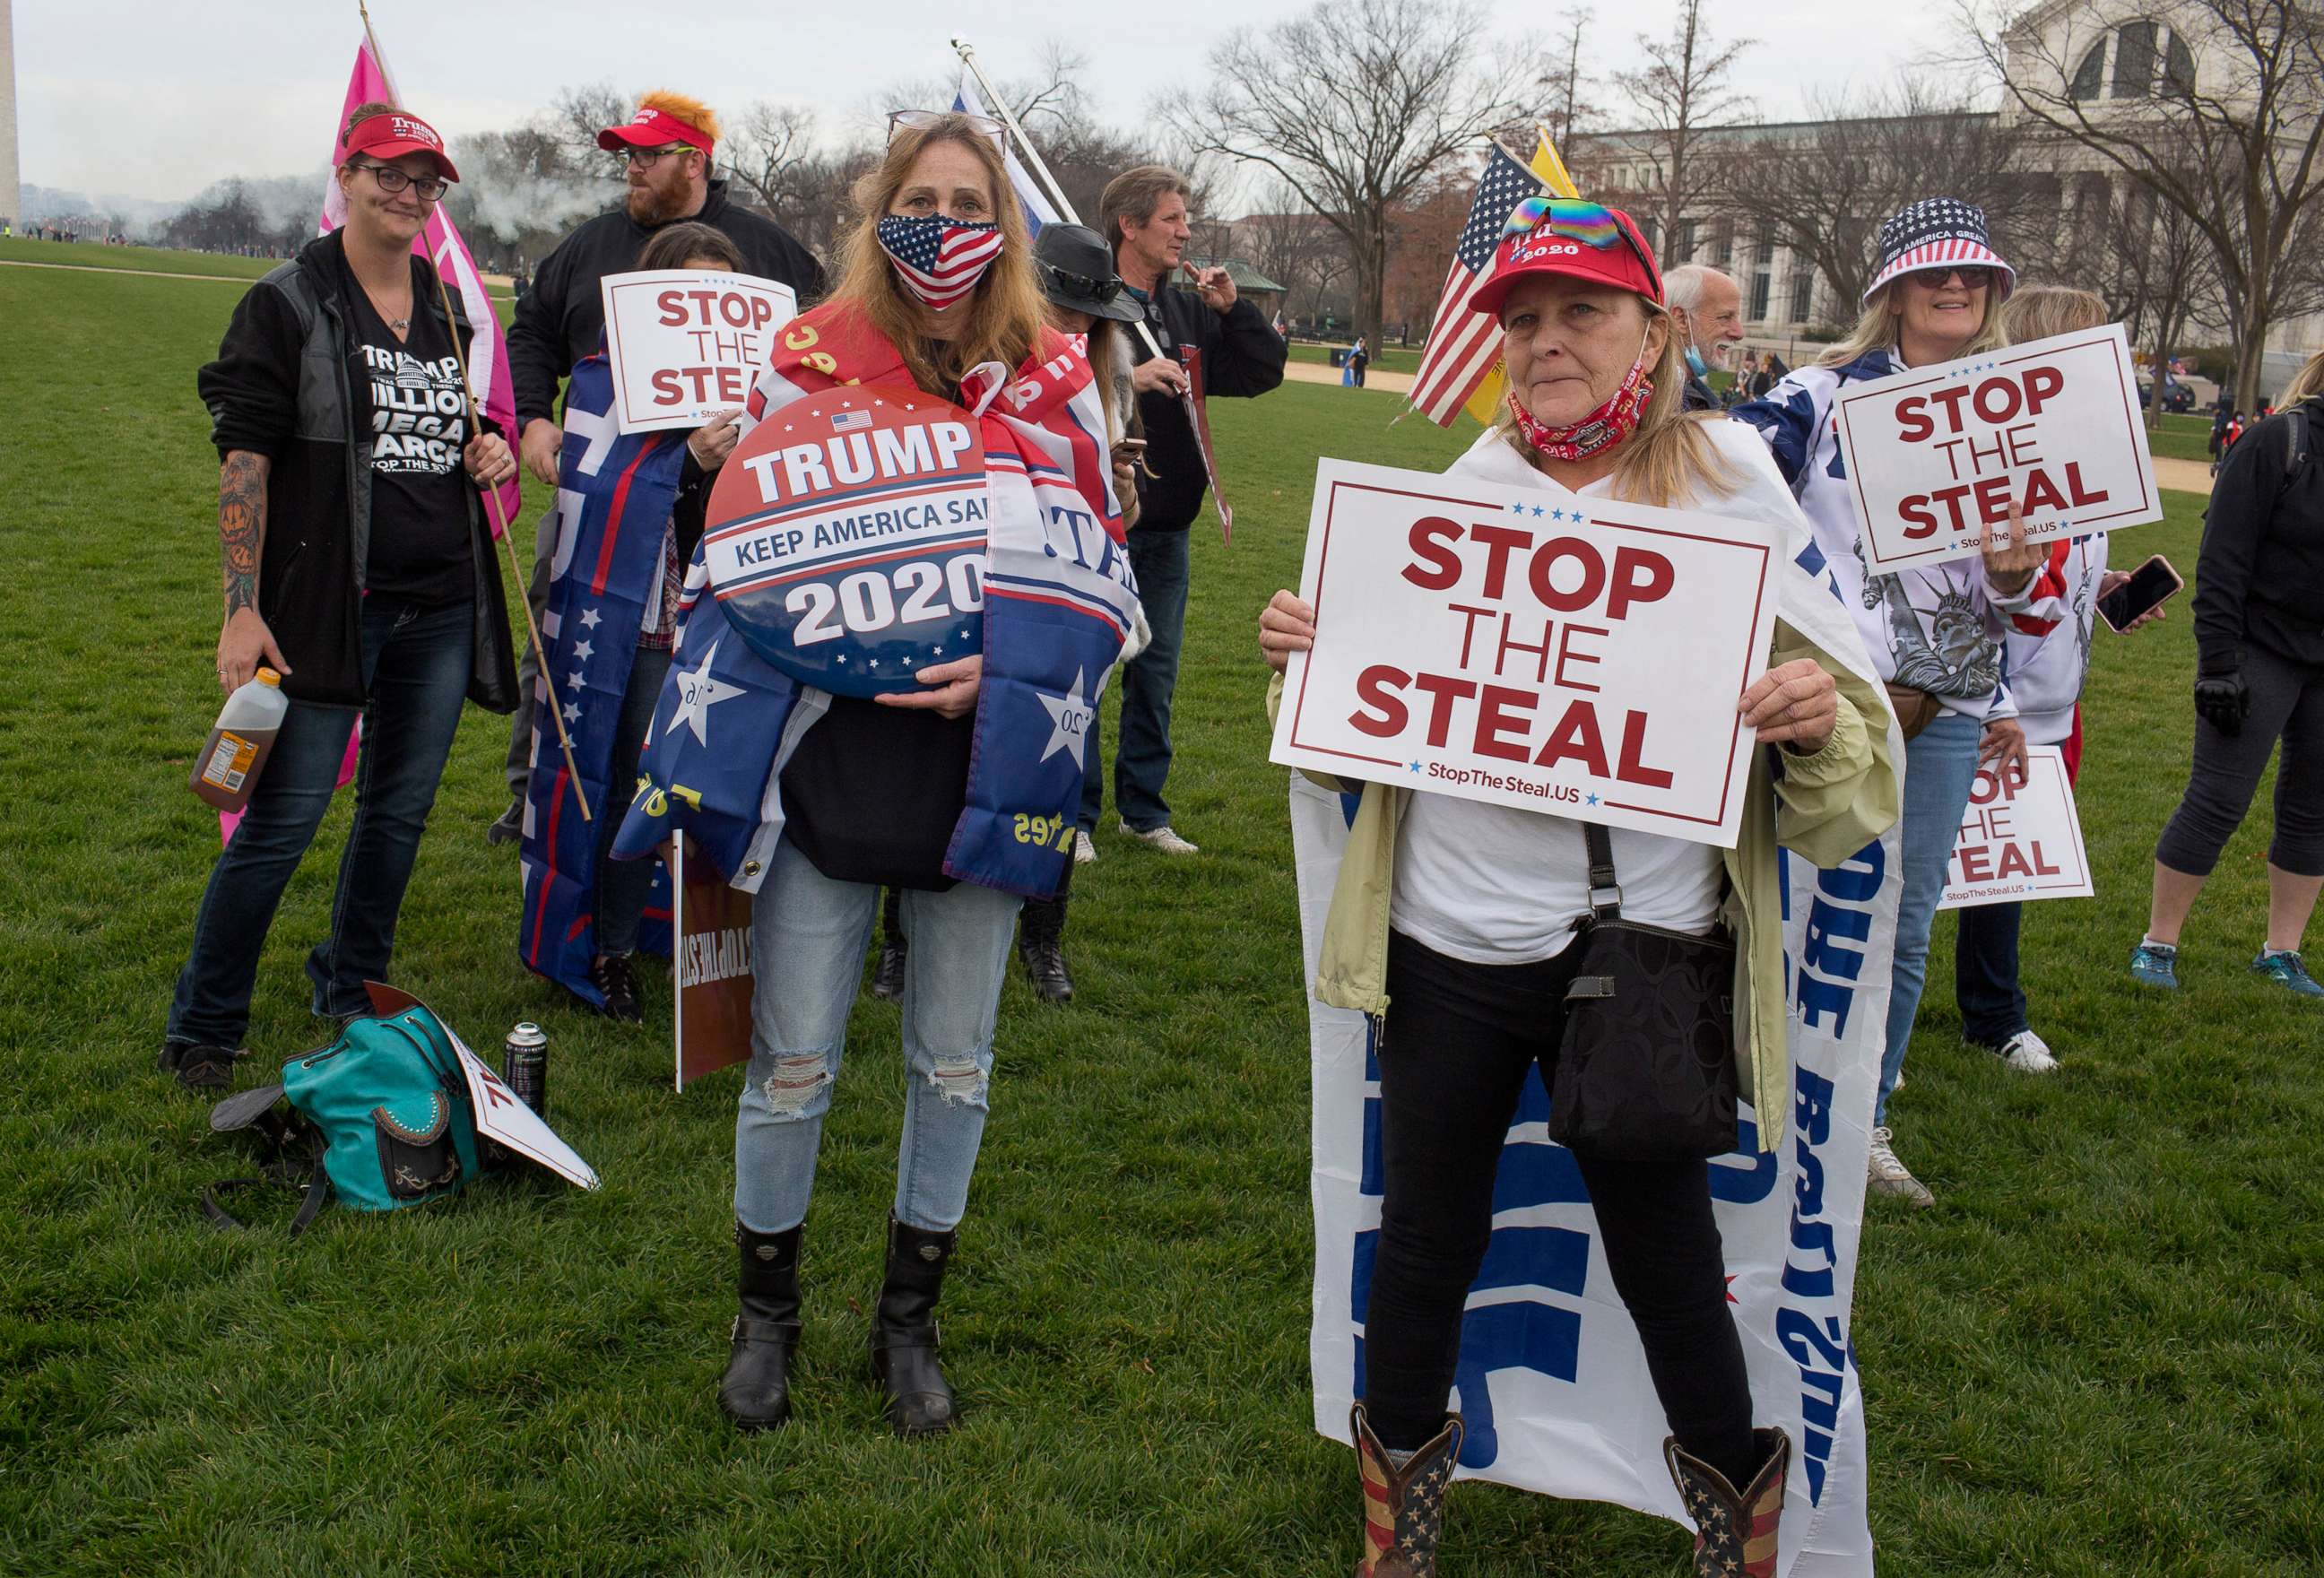 PHOTO: In this Dec. 12, 2020, file photo, Trump supporters attend a Stop the Steal rally in downtown Washington, D.C.